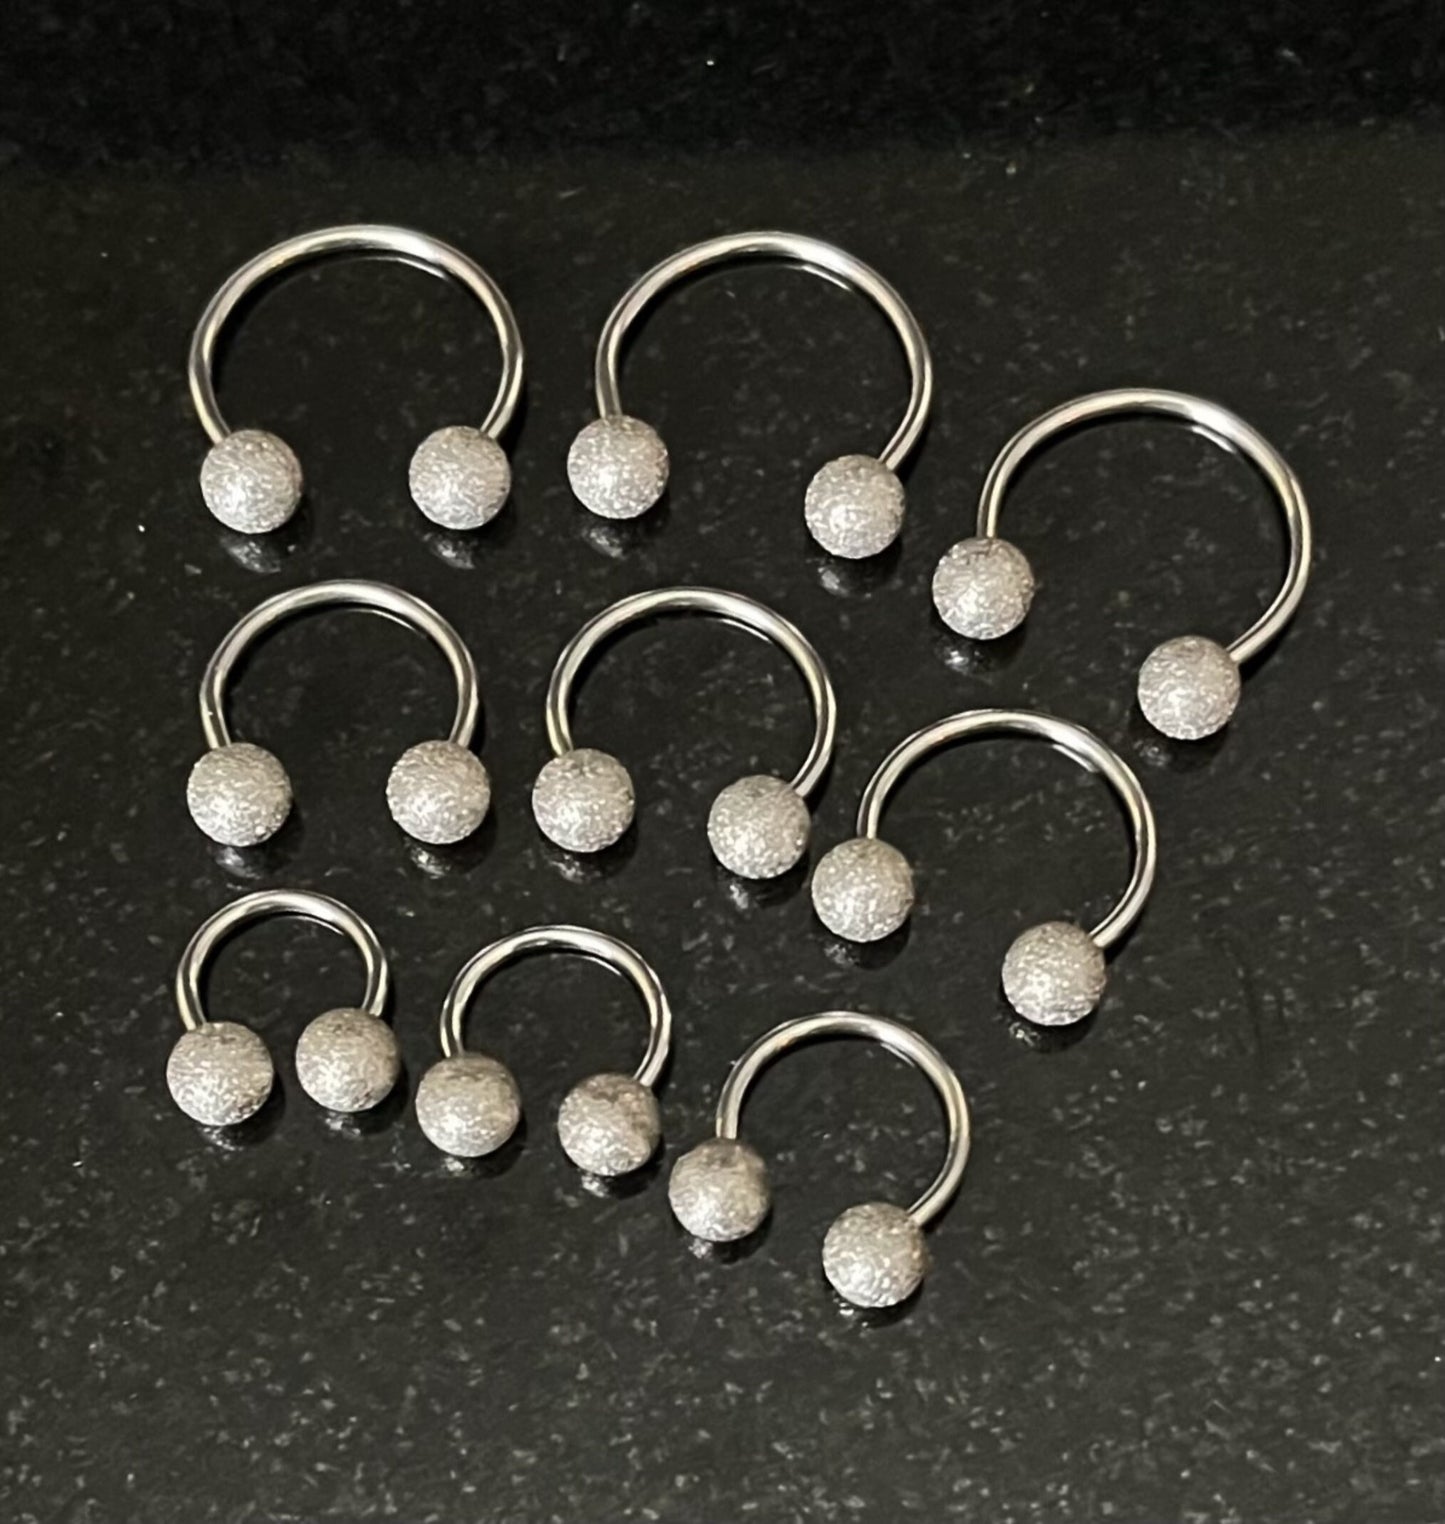 1 Piece Frosted Balls Circular Surgical Steel Horseshoe Circular Septum Ring - 16g, 1/4" (6mm) thru 5/8" (16mm) Available in 3mm, 4mm & 5mm!